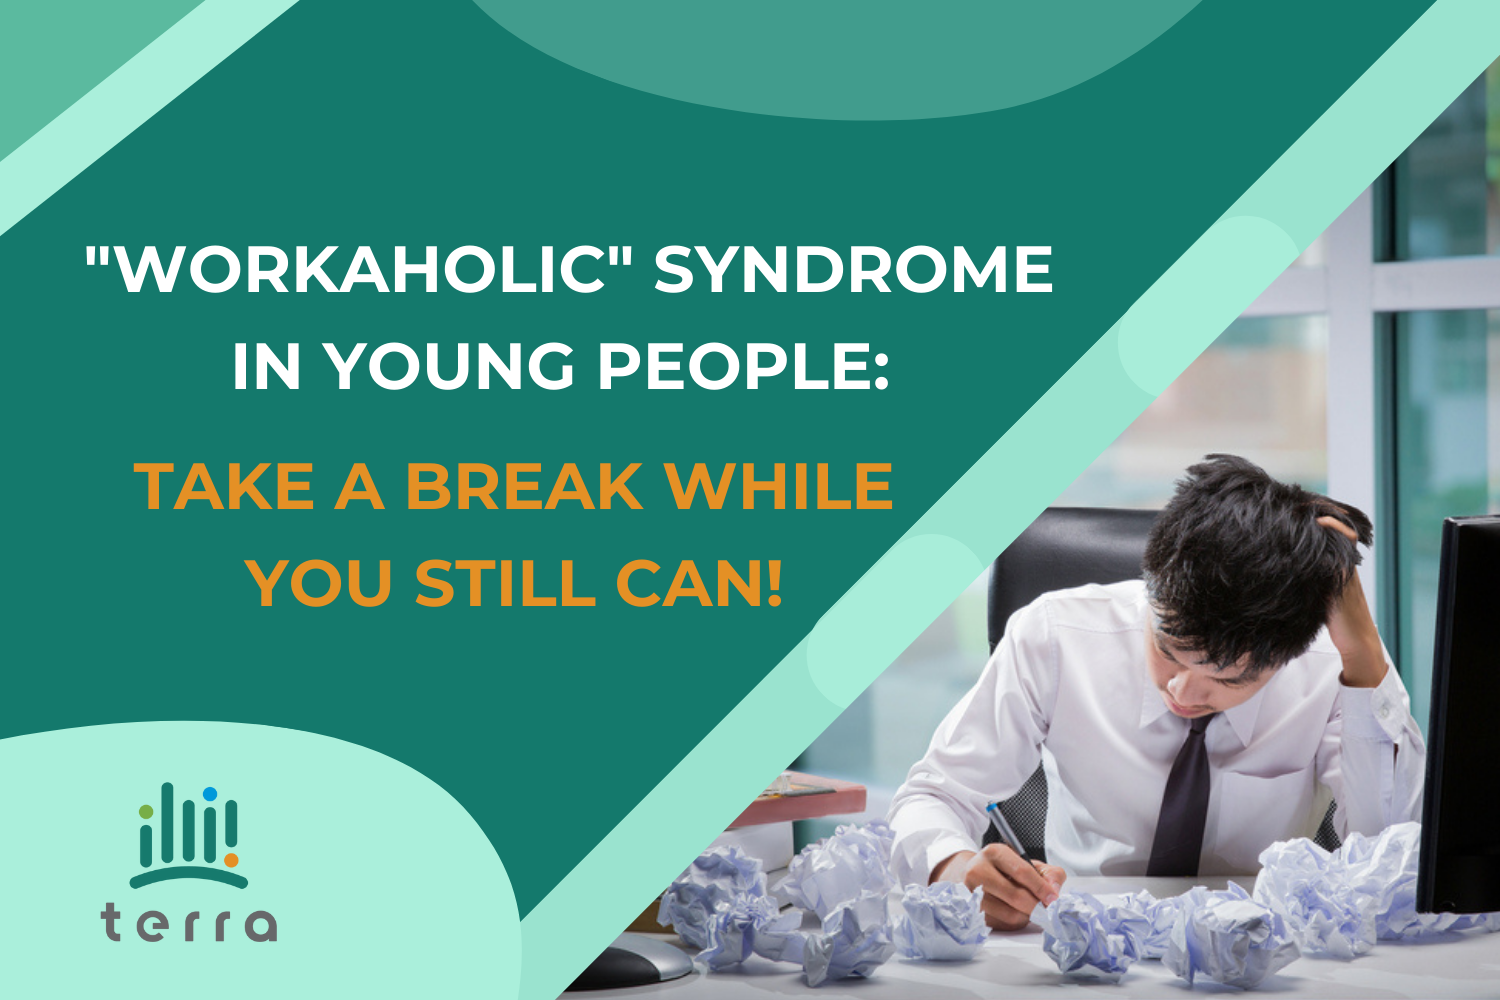 “Workaholic” syndrome in young people: take a break while you still can!